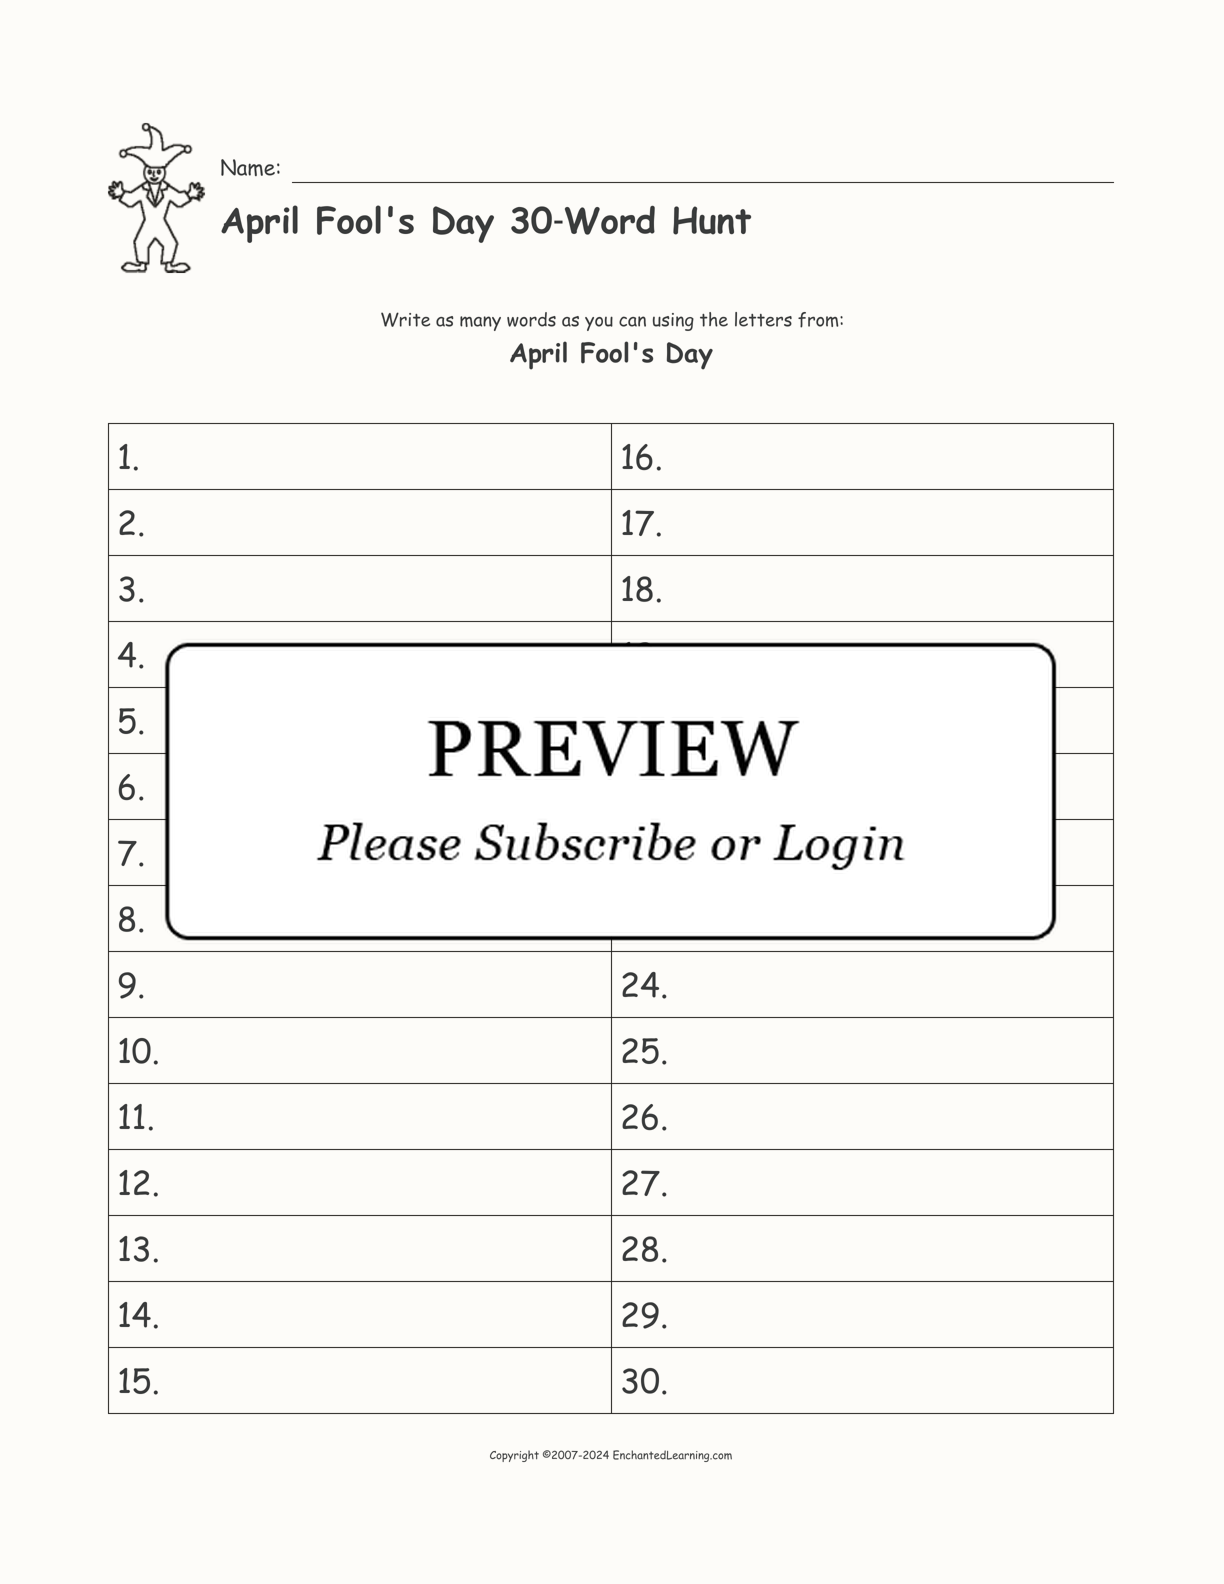 April Fool's Day 30‑Word Hunt interactive worksheet page 1